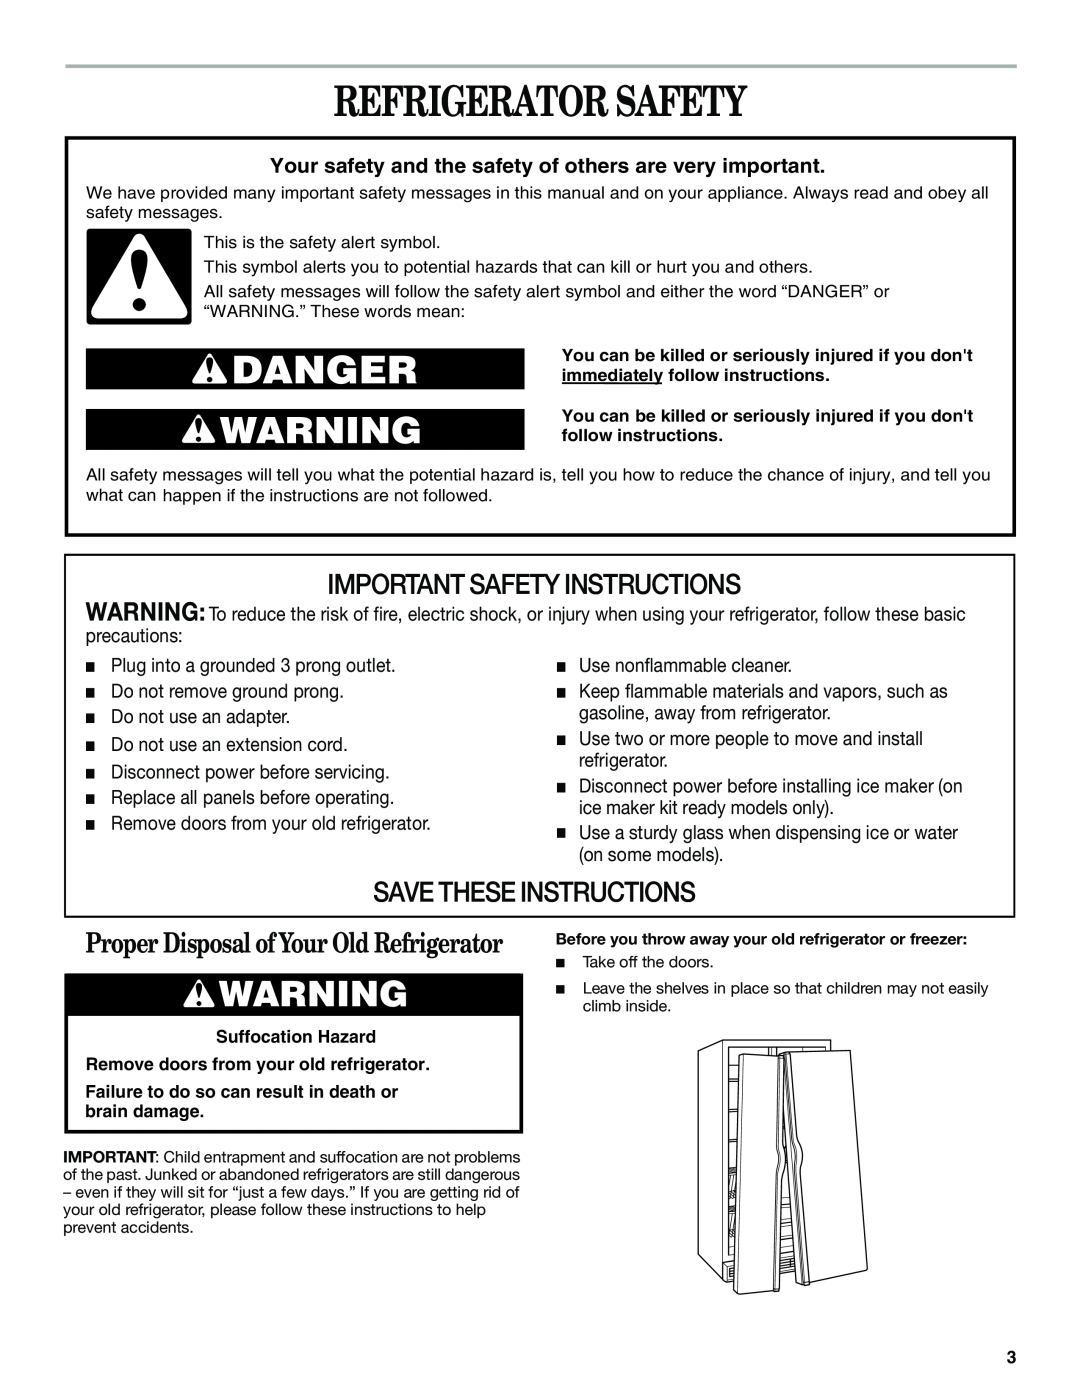 Whirlpool GS6SHANLB00 manual Refrigerator Safety, Important Safety Instructions, Save These Instructions 